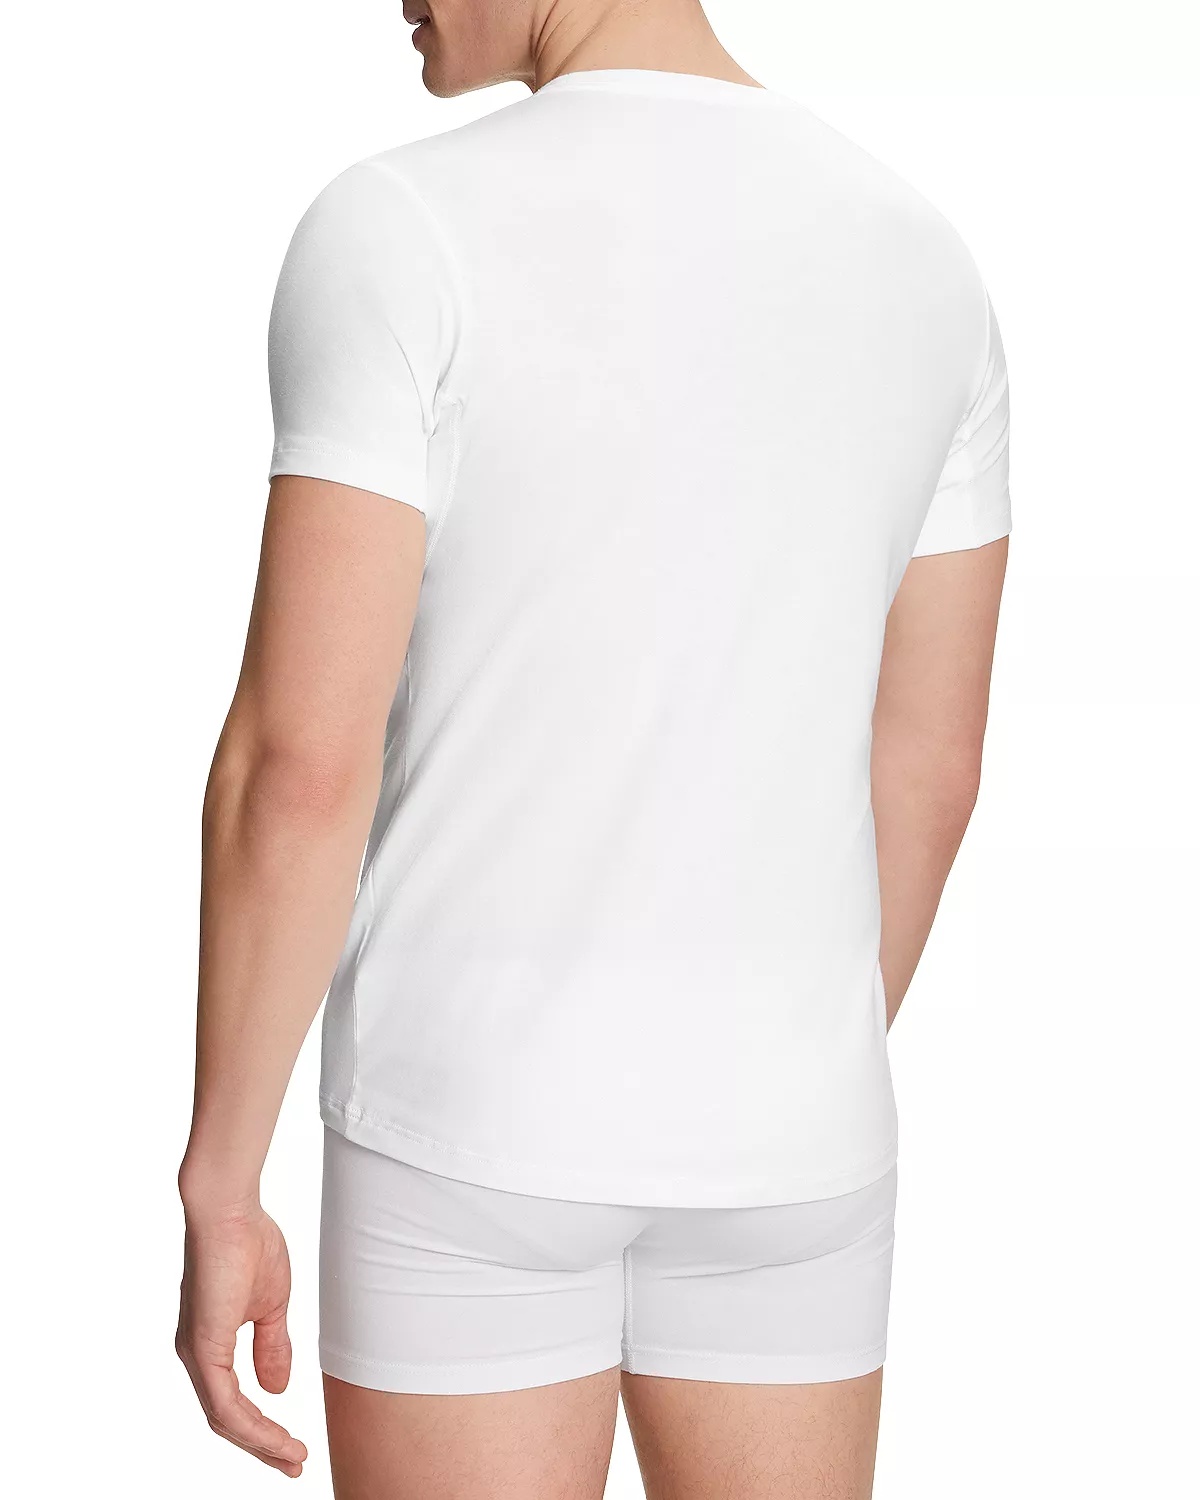 Outlast Climate Control Undershirt - 3